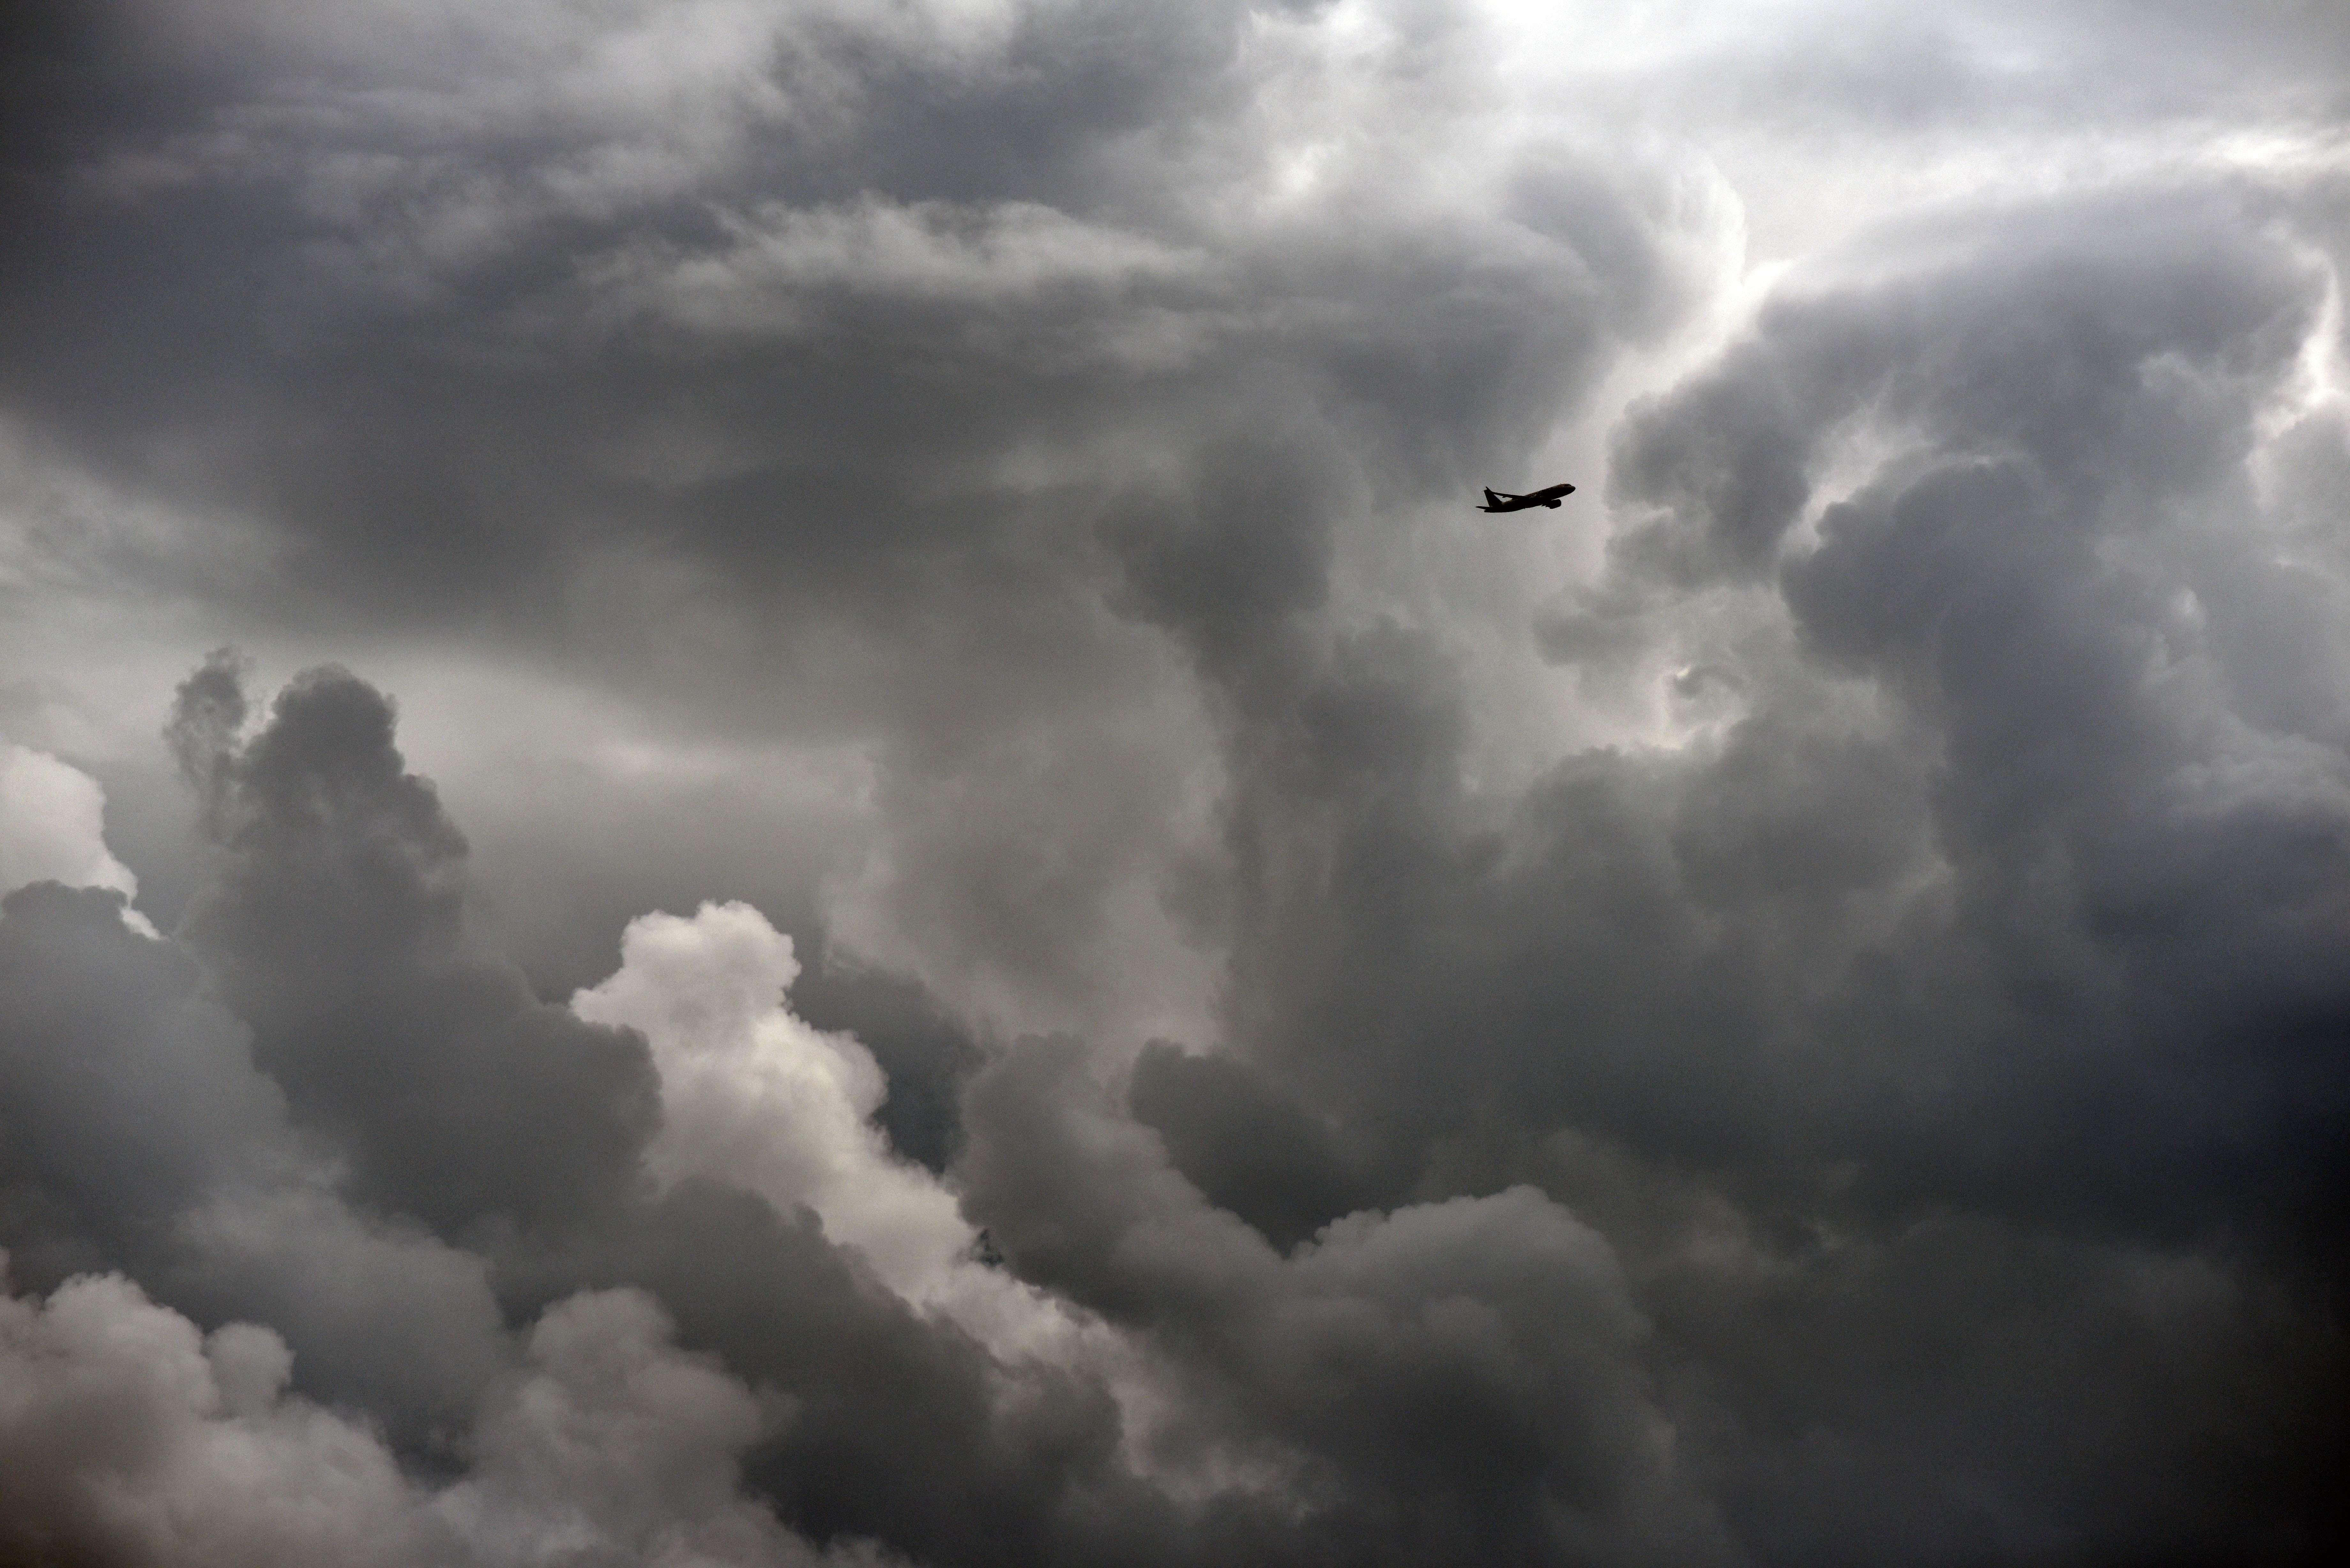 Plane traveling through storm clouds in sky